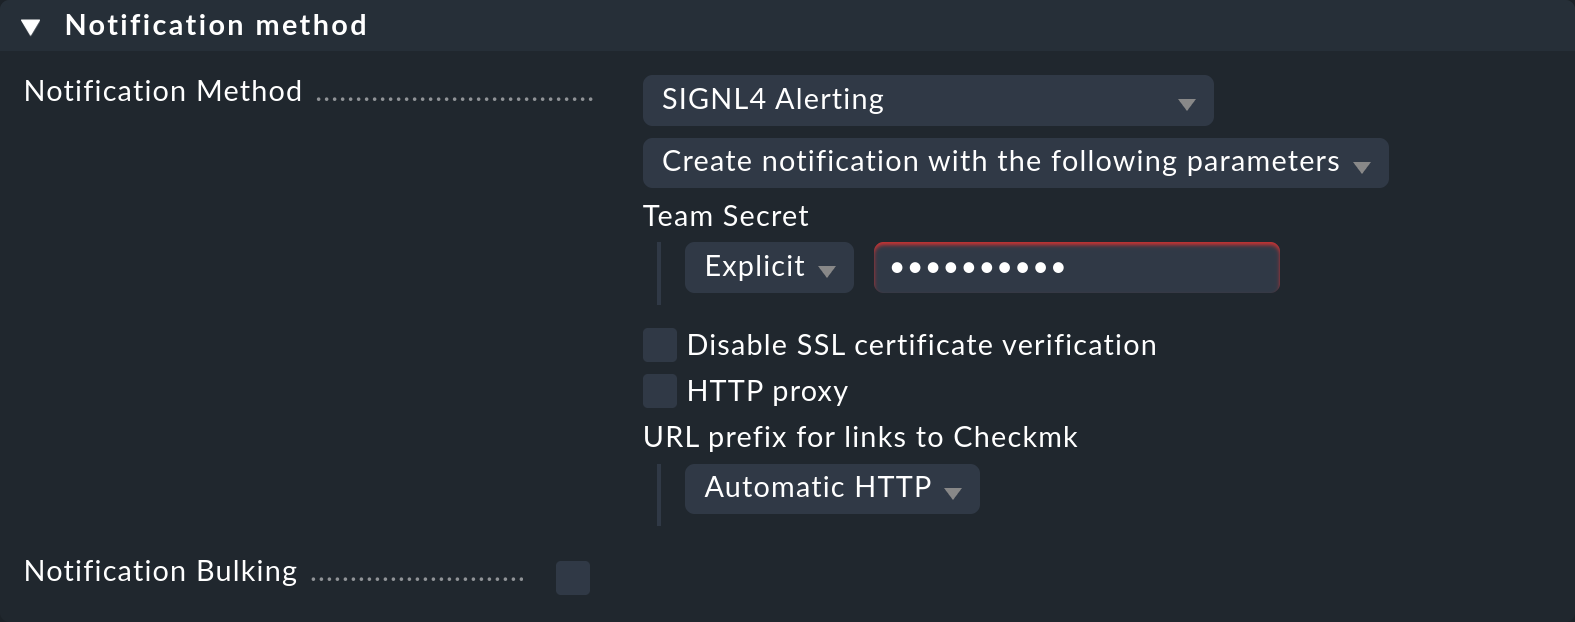 The notification method settings for SIGNL4.